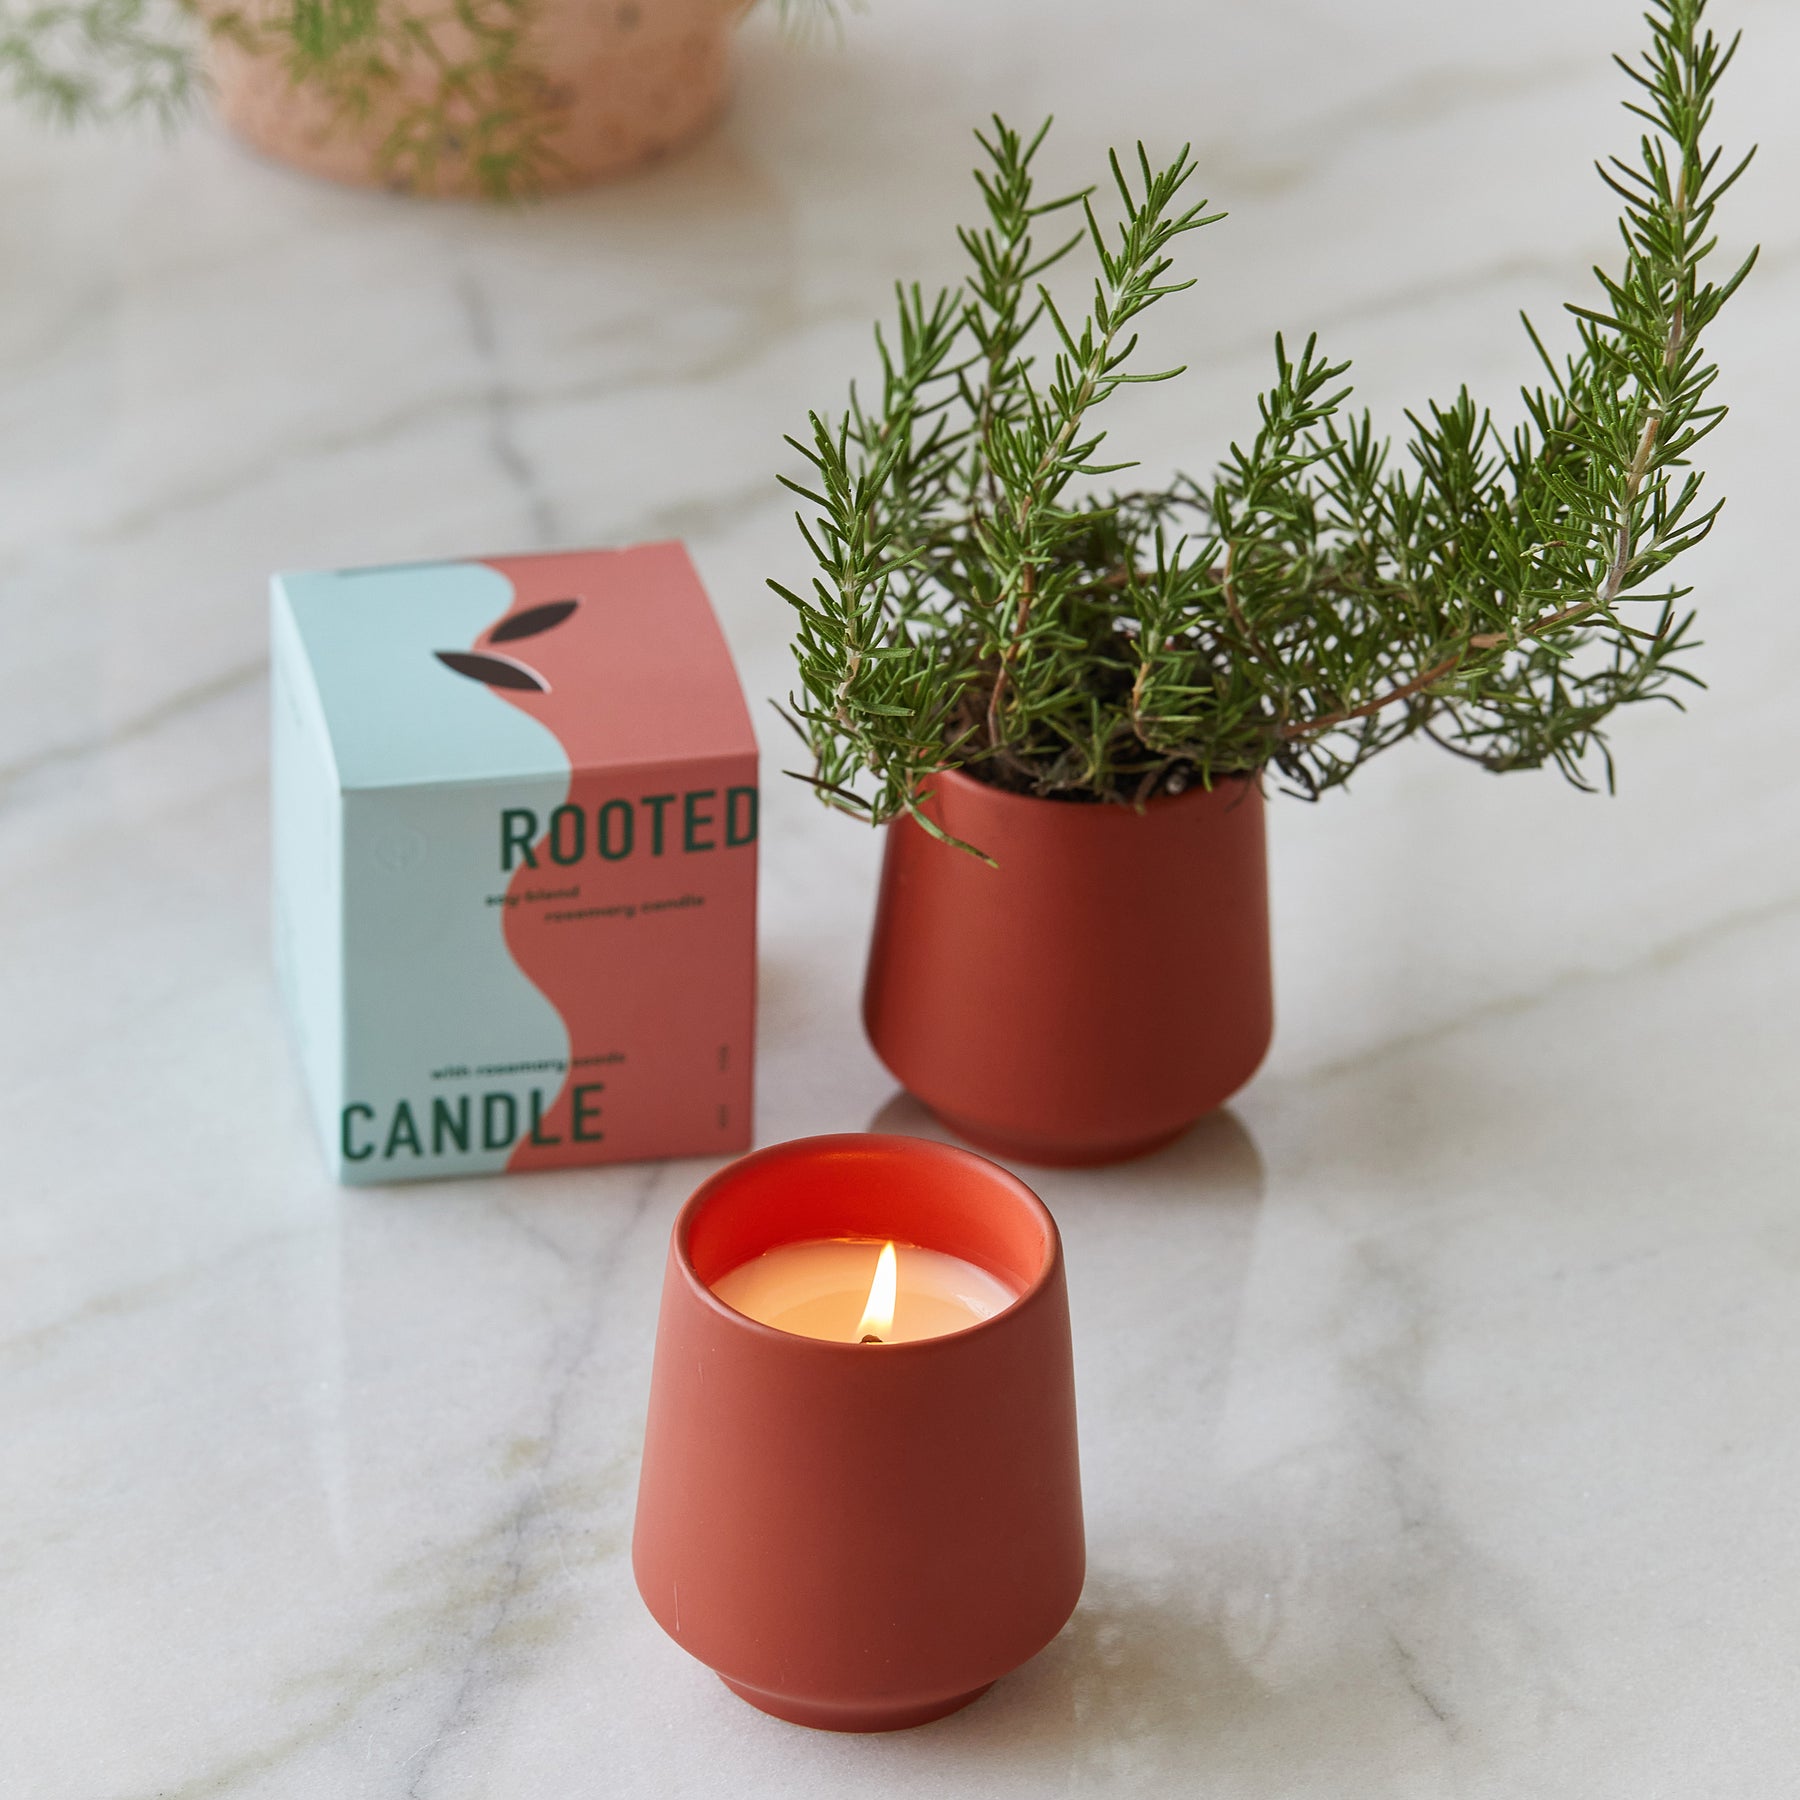 Rooted Candles